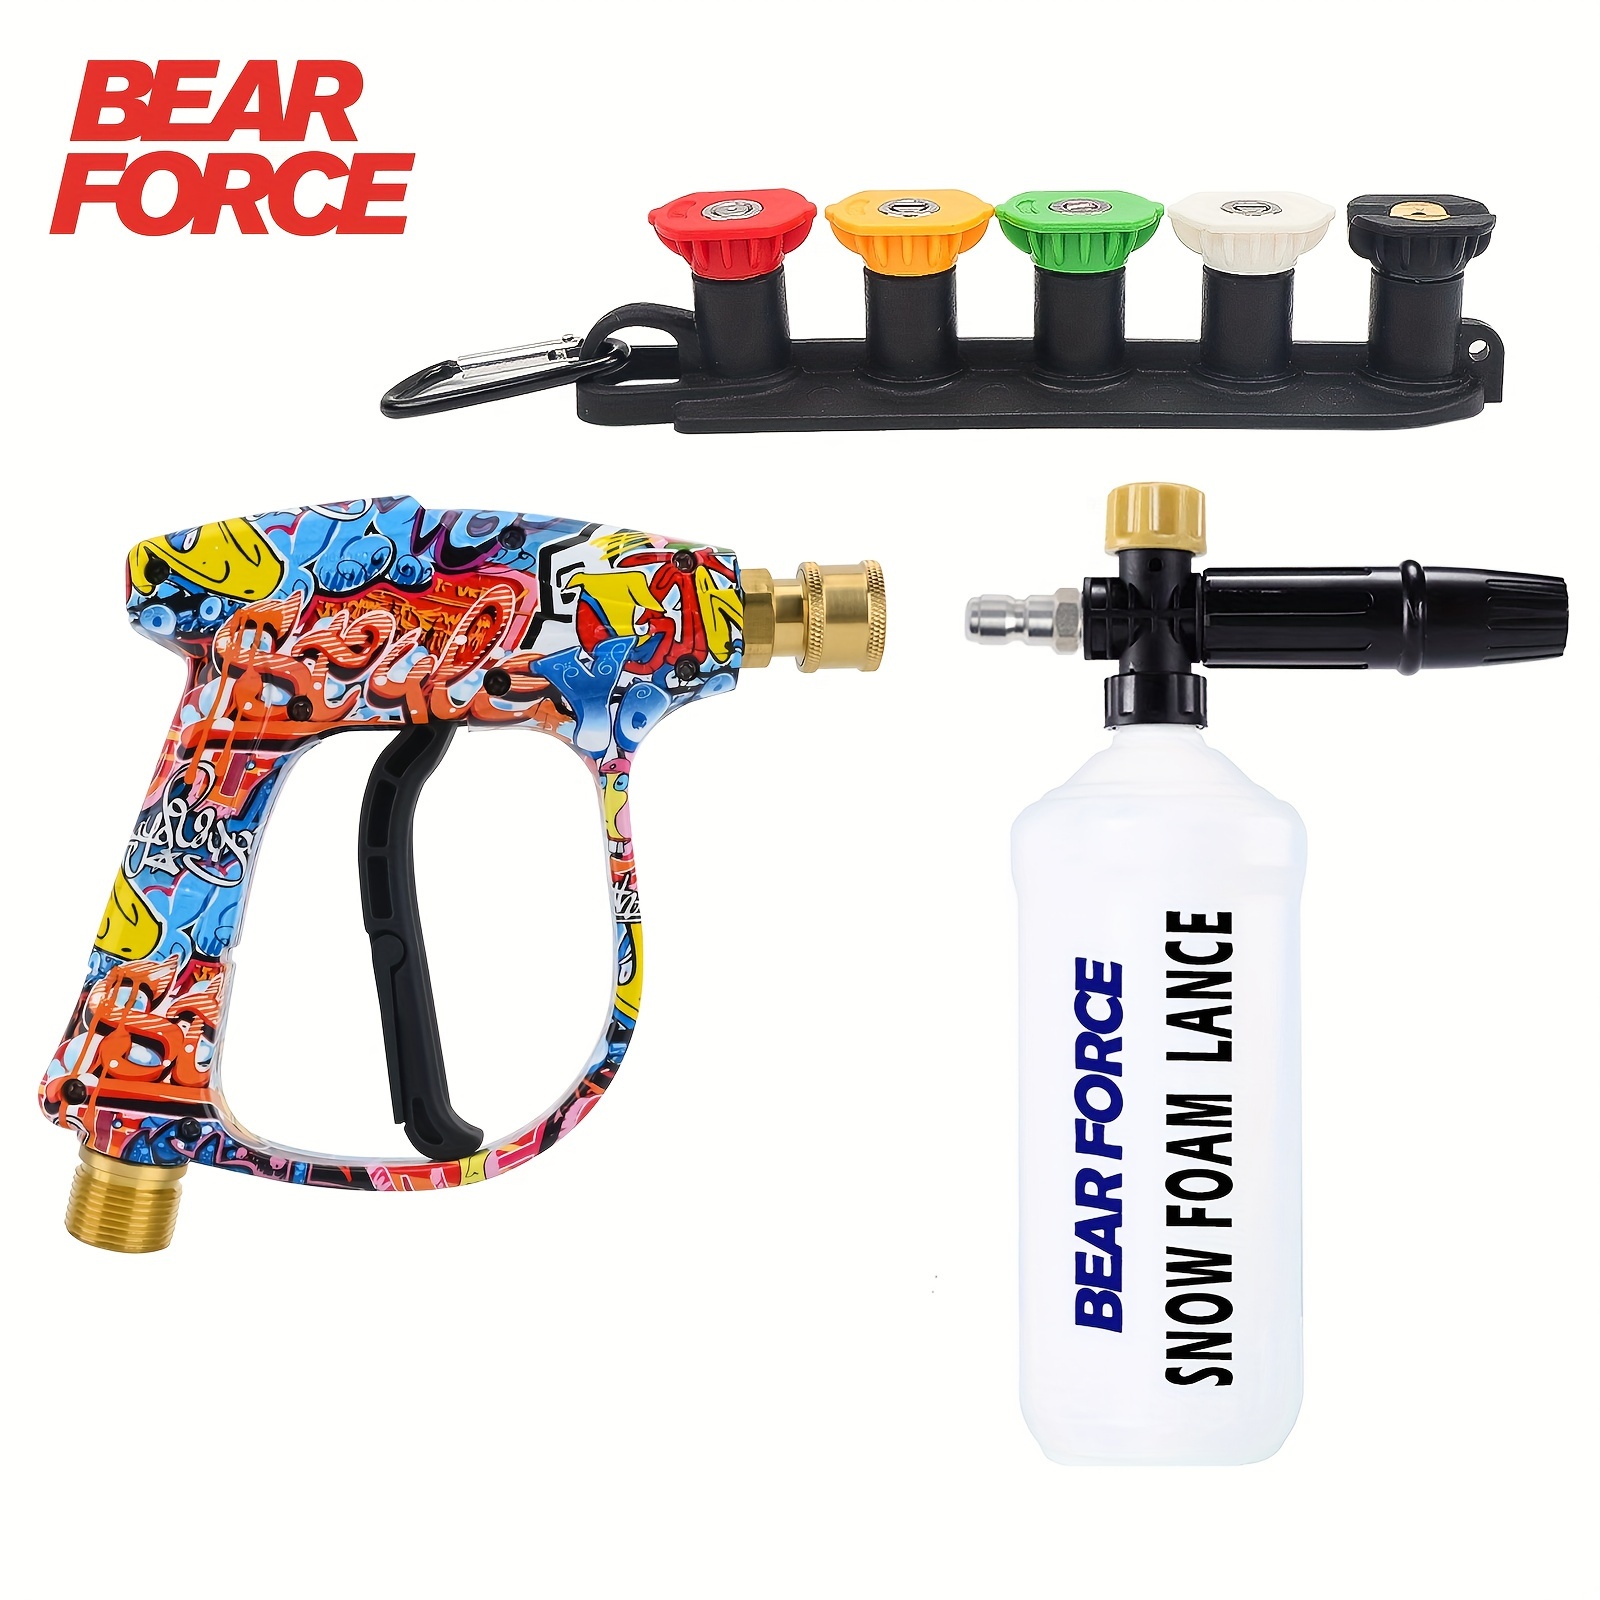 Pressure Washer Gun Snow Foam Lance Cannon Foam Blaster, with 5 Pcs  Pressure Washer Nozzle Tip, 3000 PSI Jet Wash Gun, M22-14 mm and 3/8 Quick  Inlet Connector 